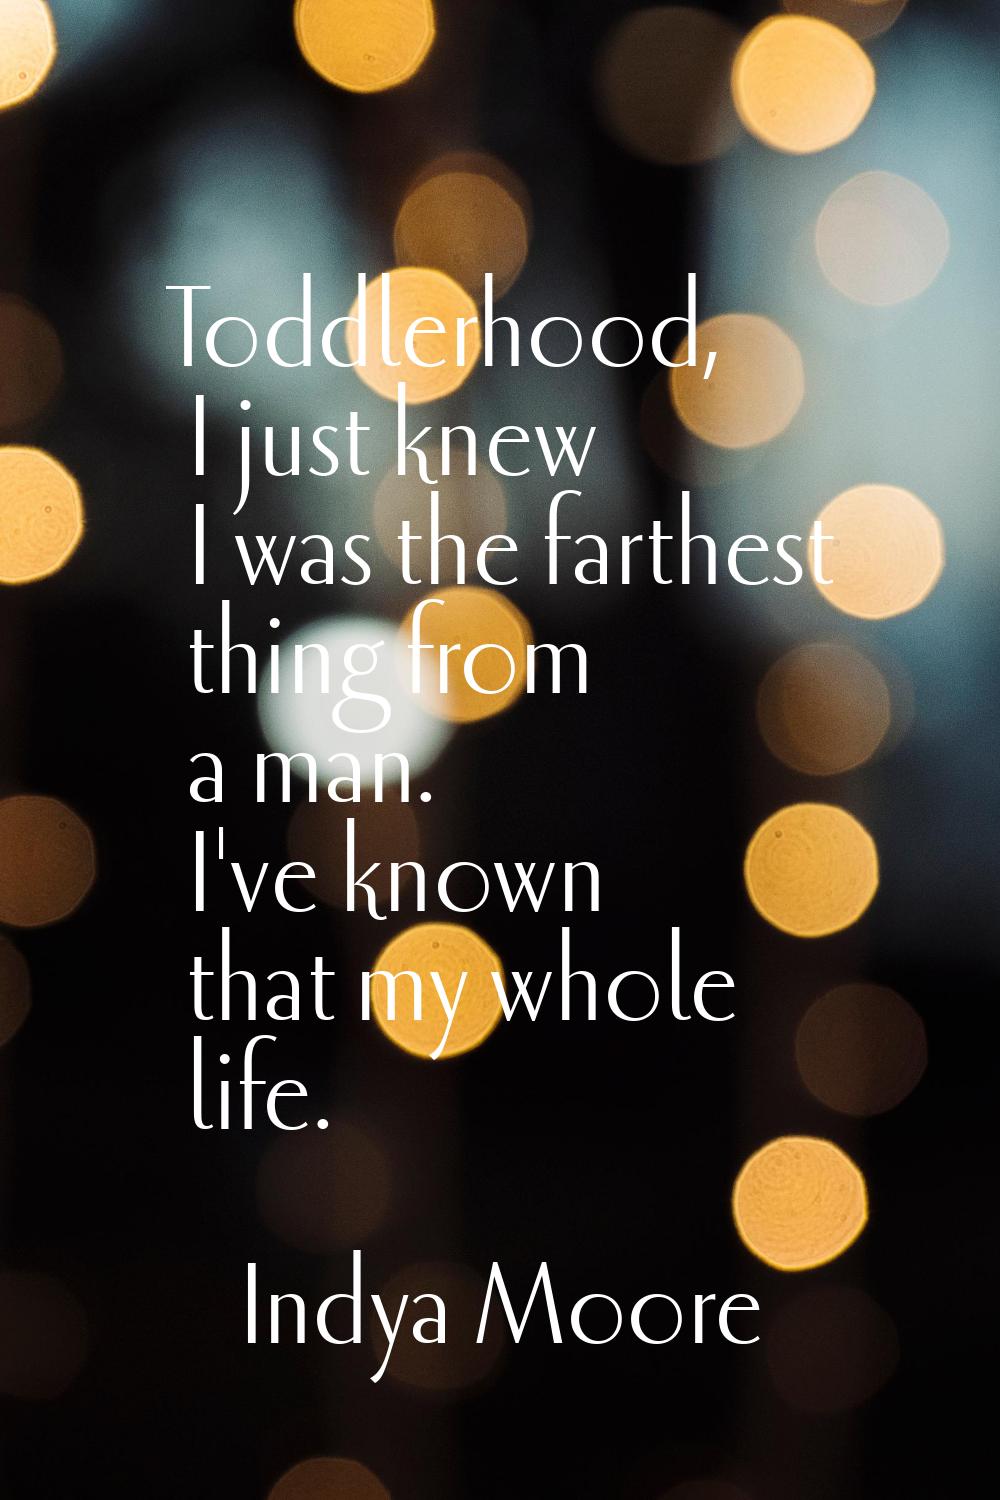 Toddlerhood, I just knew I was the farthest thing from a man. I've known that my whole life.